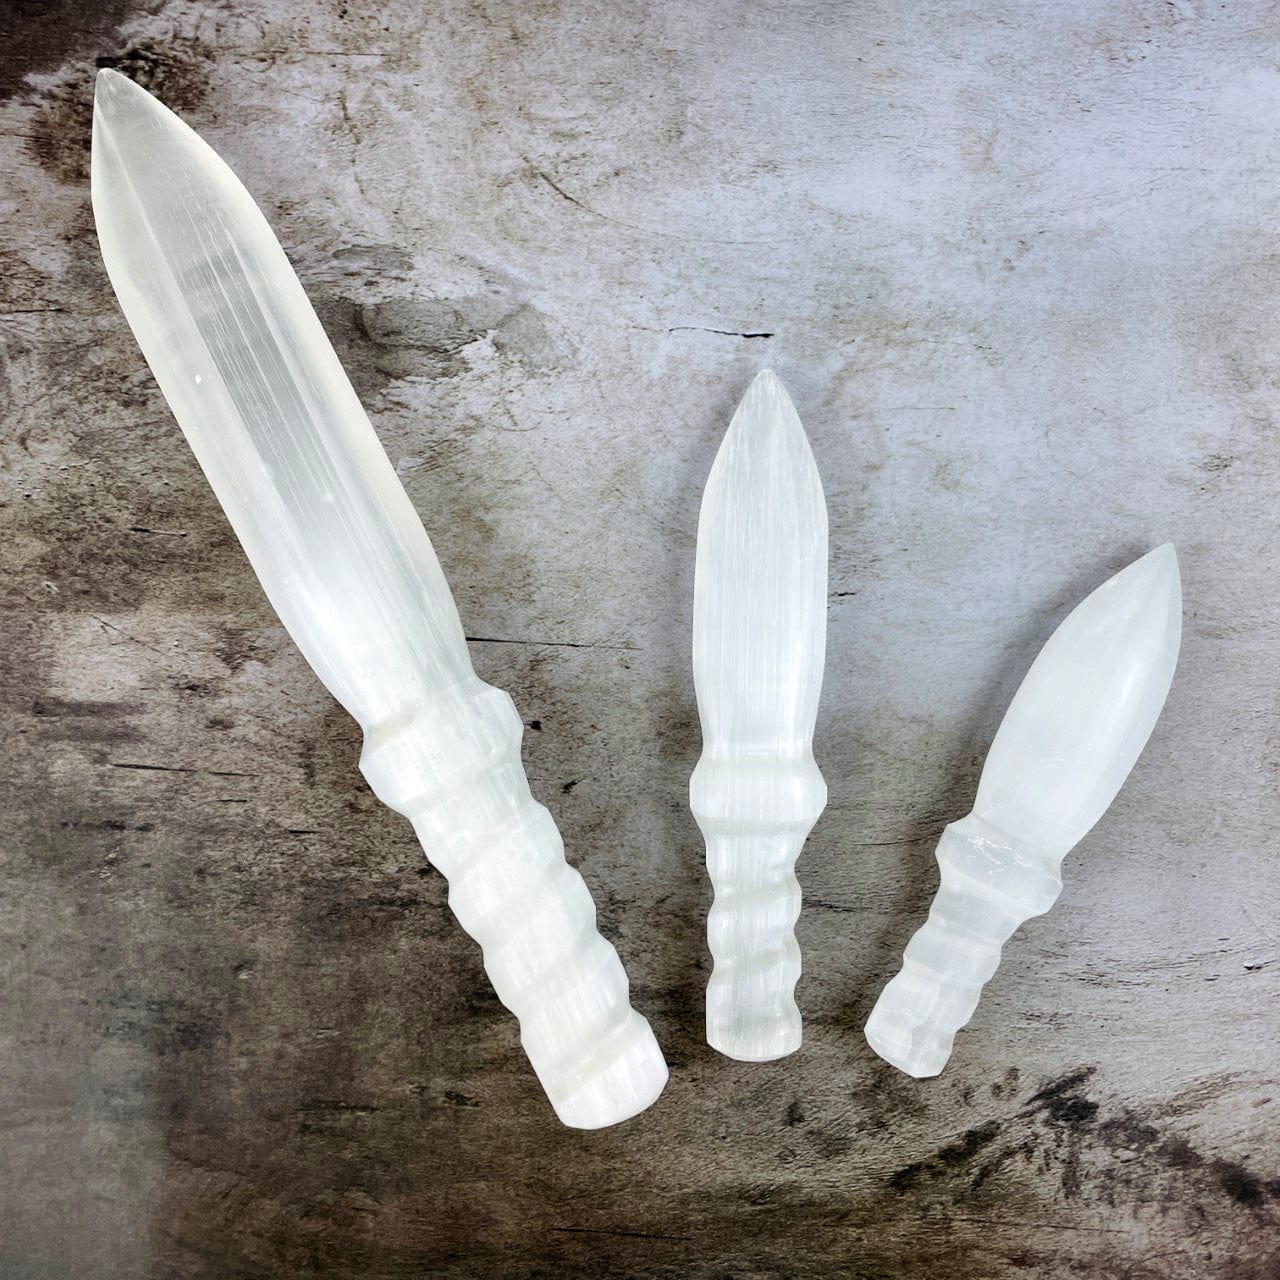 3 Selenite Knife with Twisted Handles, Hand Carved and Polished fanned out